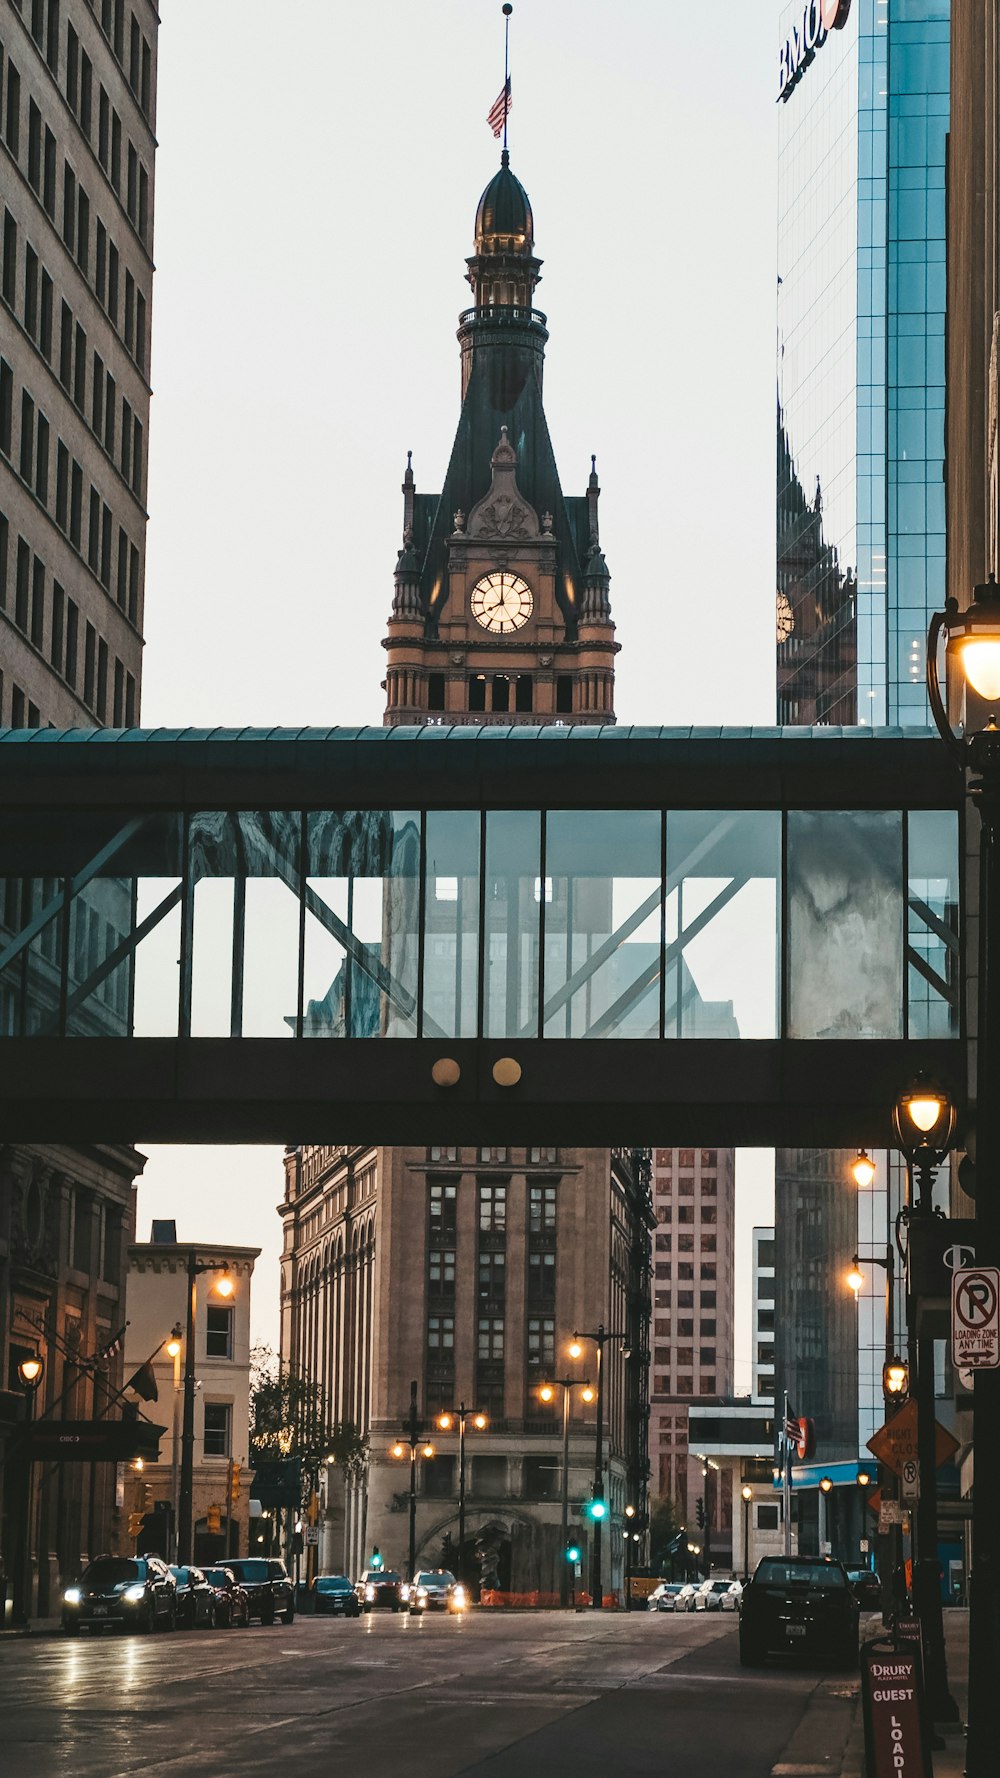 a clock tower towering over a city street